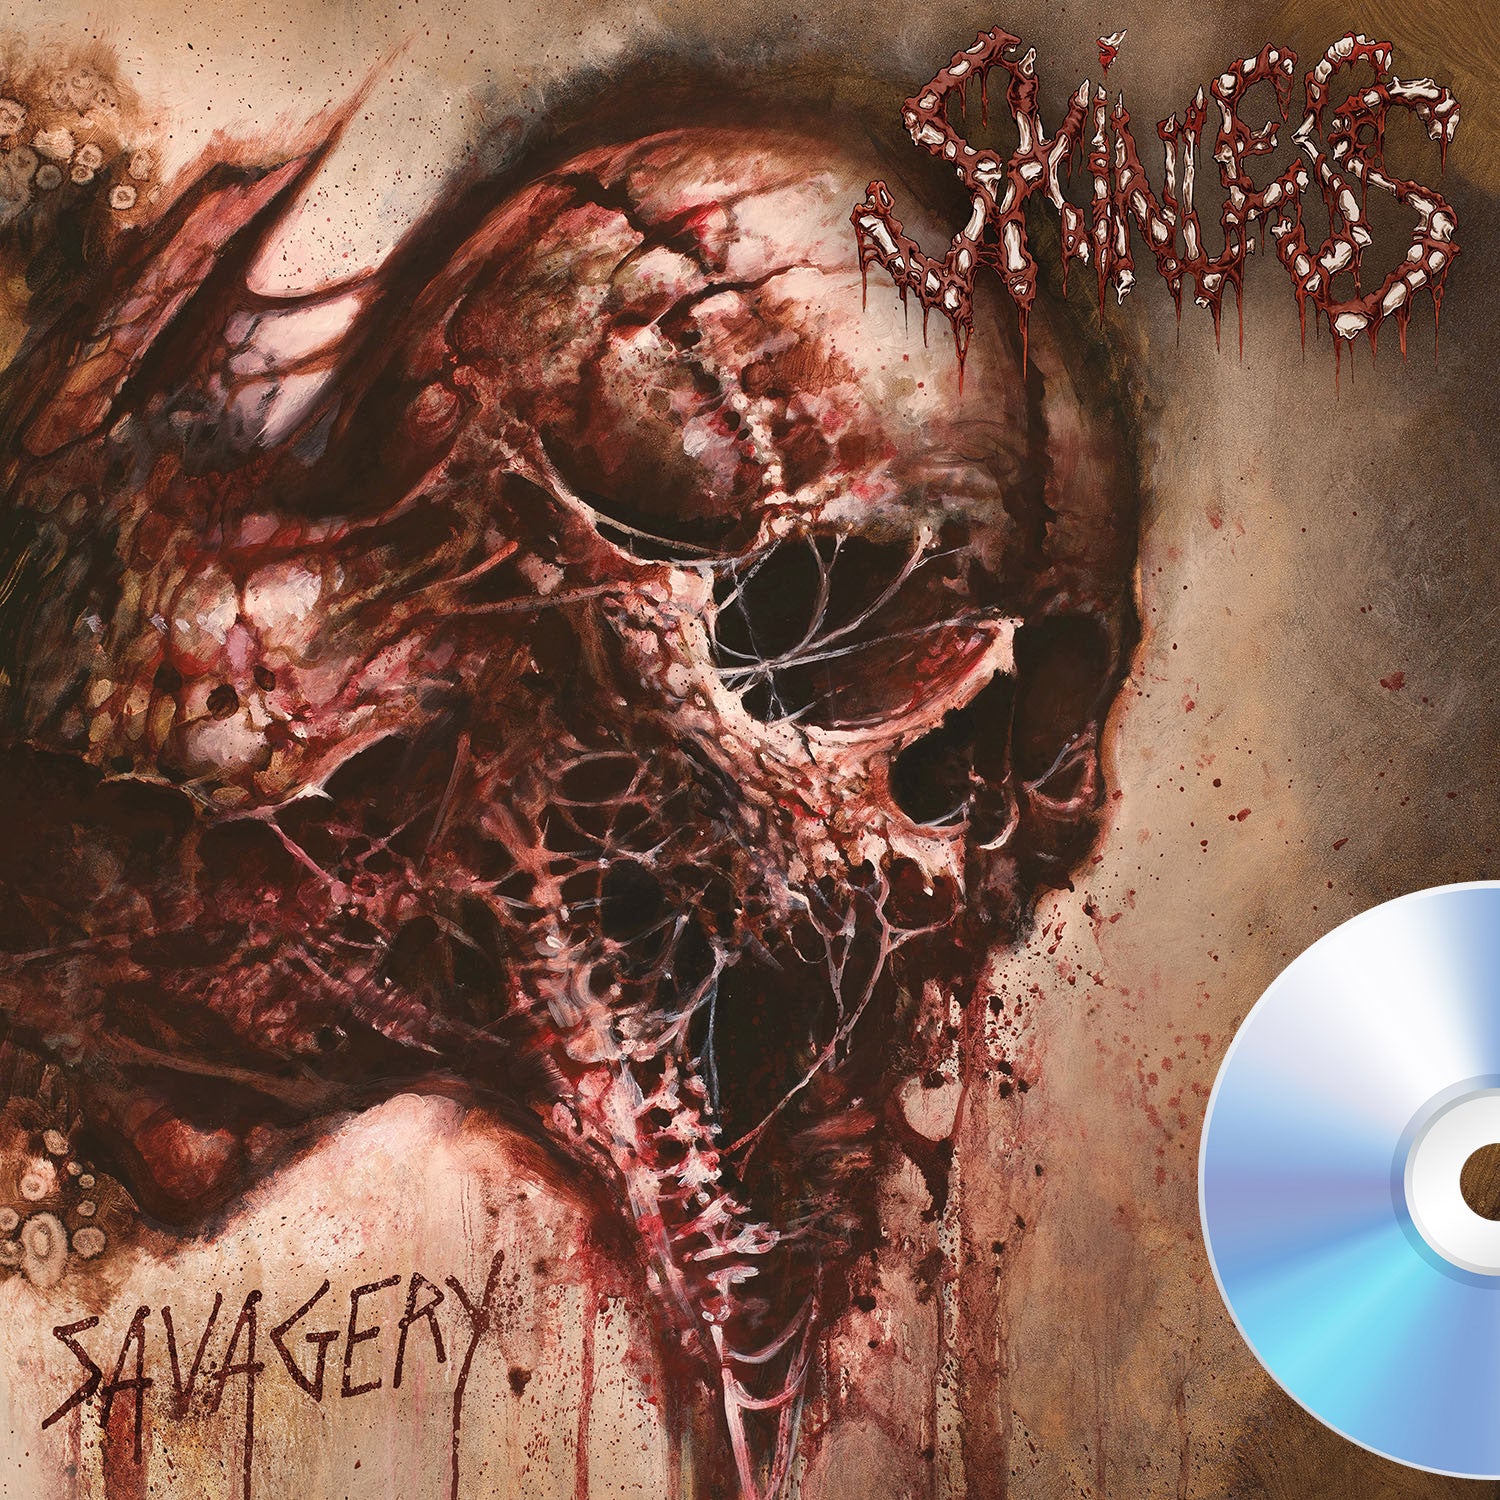 Skinless "Savagery" CD